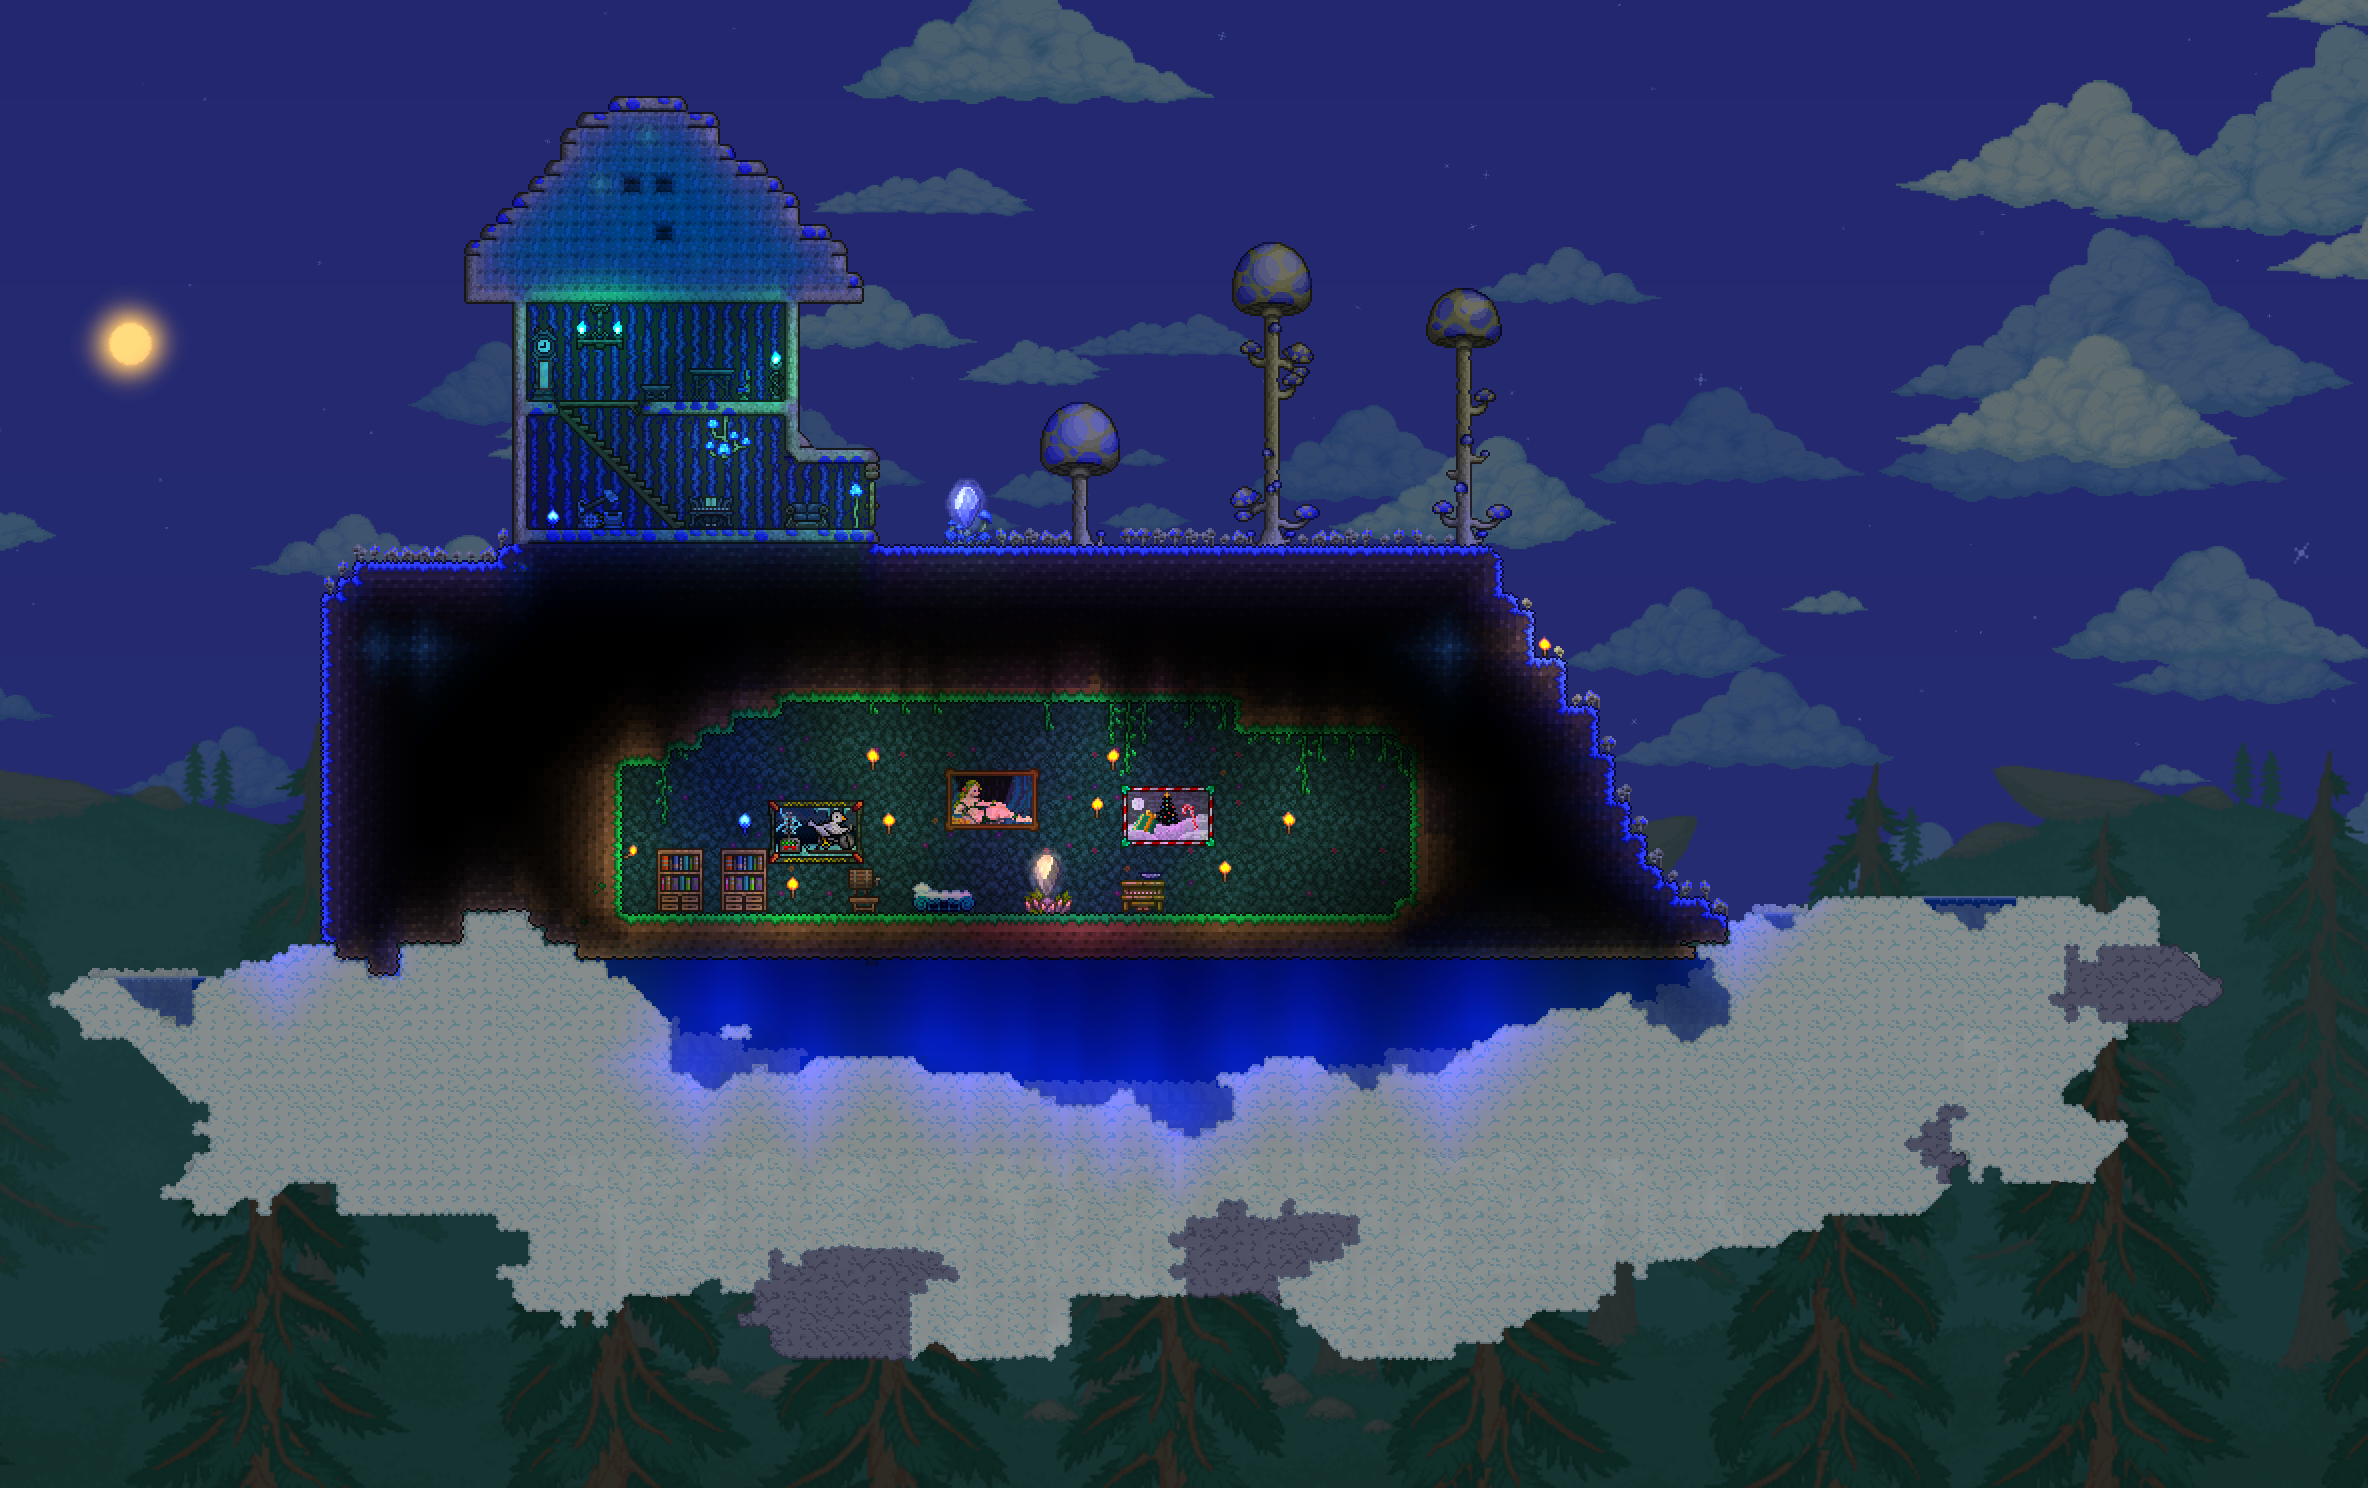 start of my journey mode world download for free :/ : r/Terraria